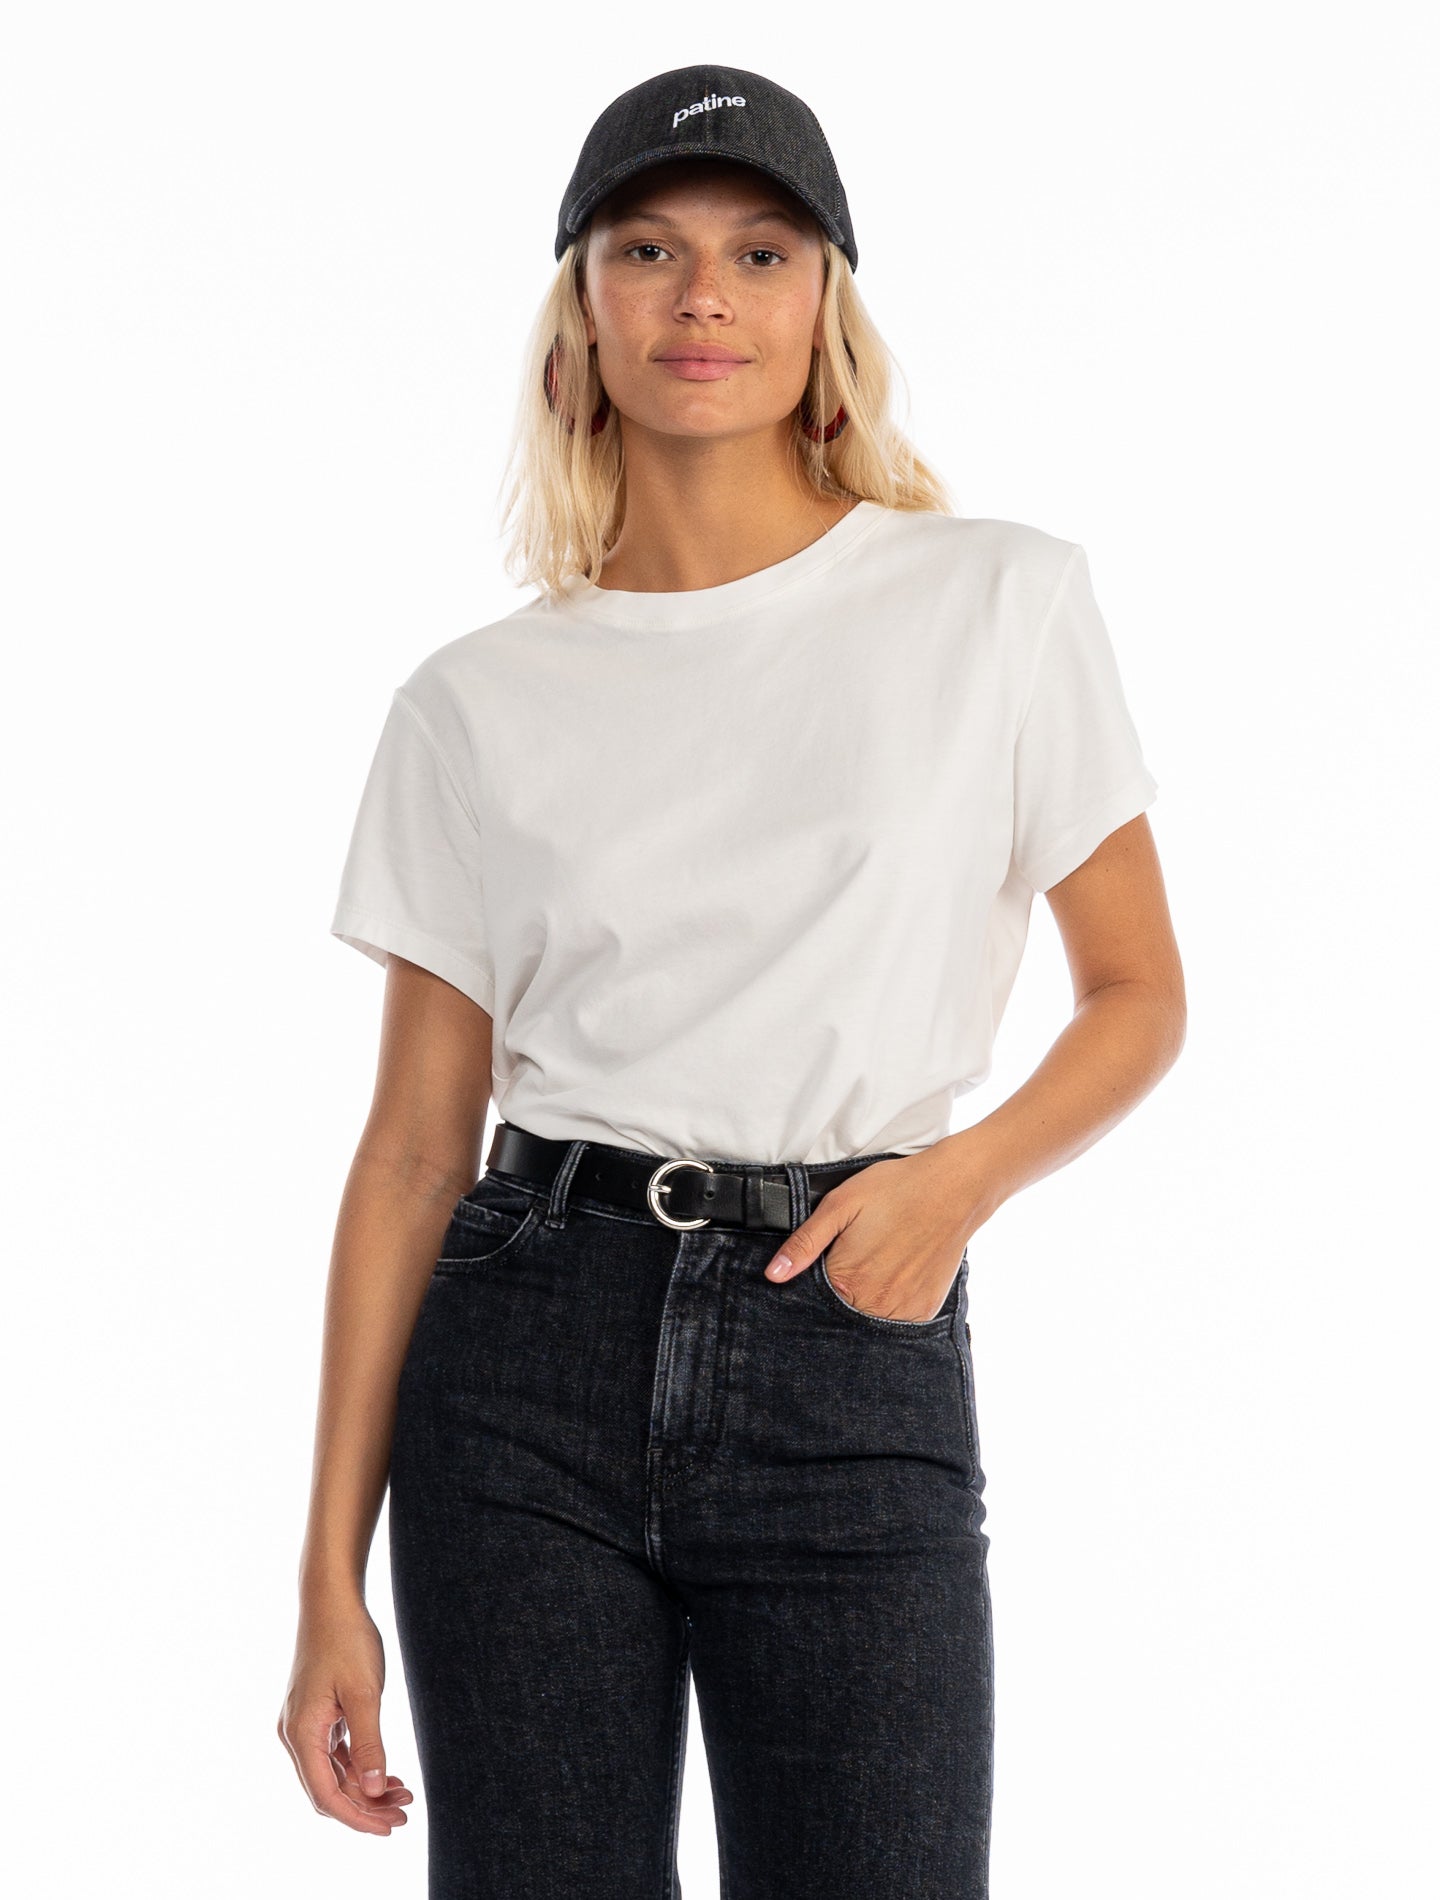 Le tee-shirt Iconic Willie® jersey bio-recyclé Blanc cheesecake